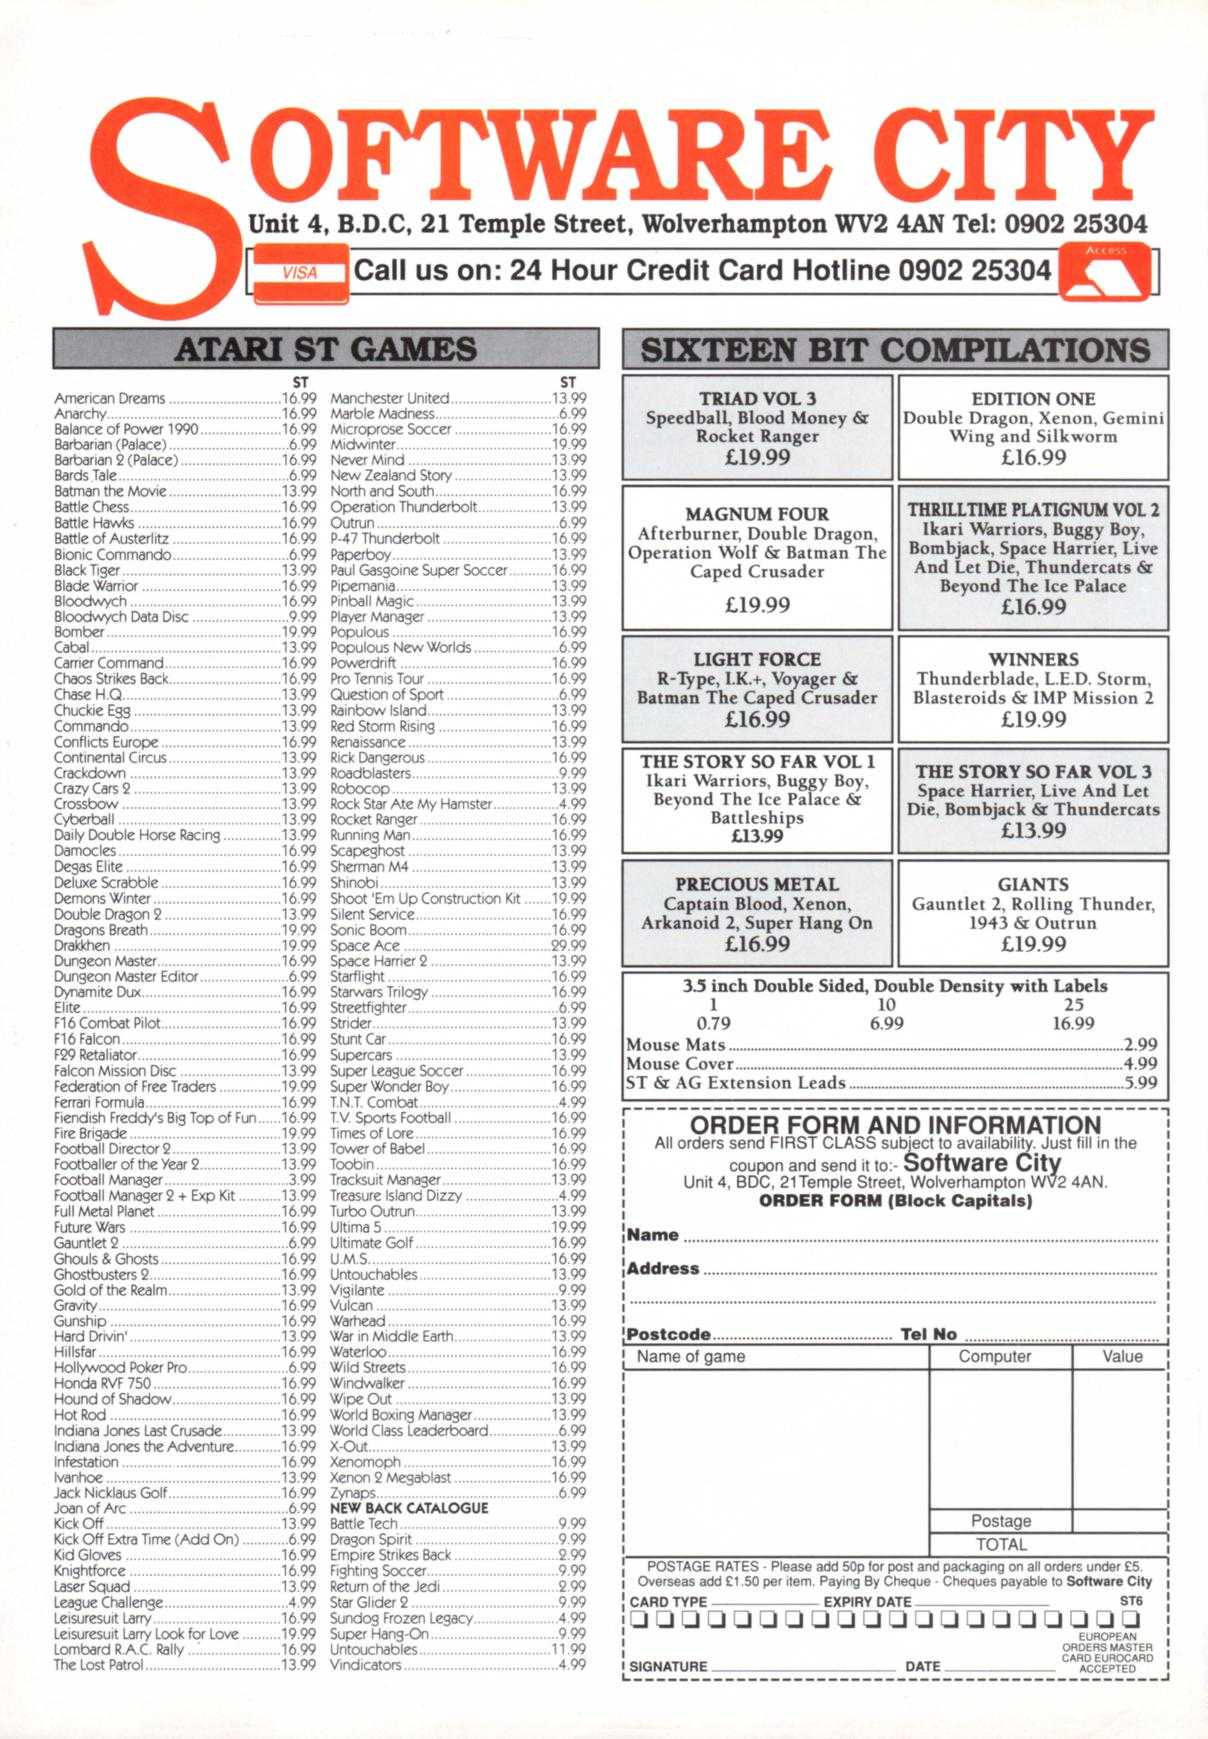 Chapter 13 Changes On the Western Frontier Worksheet Answers or Oldgamemags Stformat 011 Pdf atari